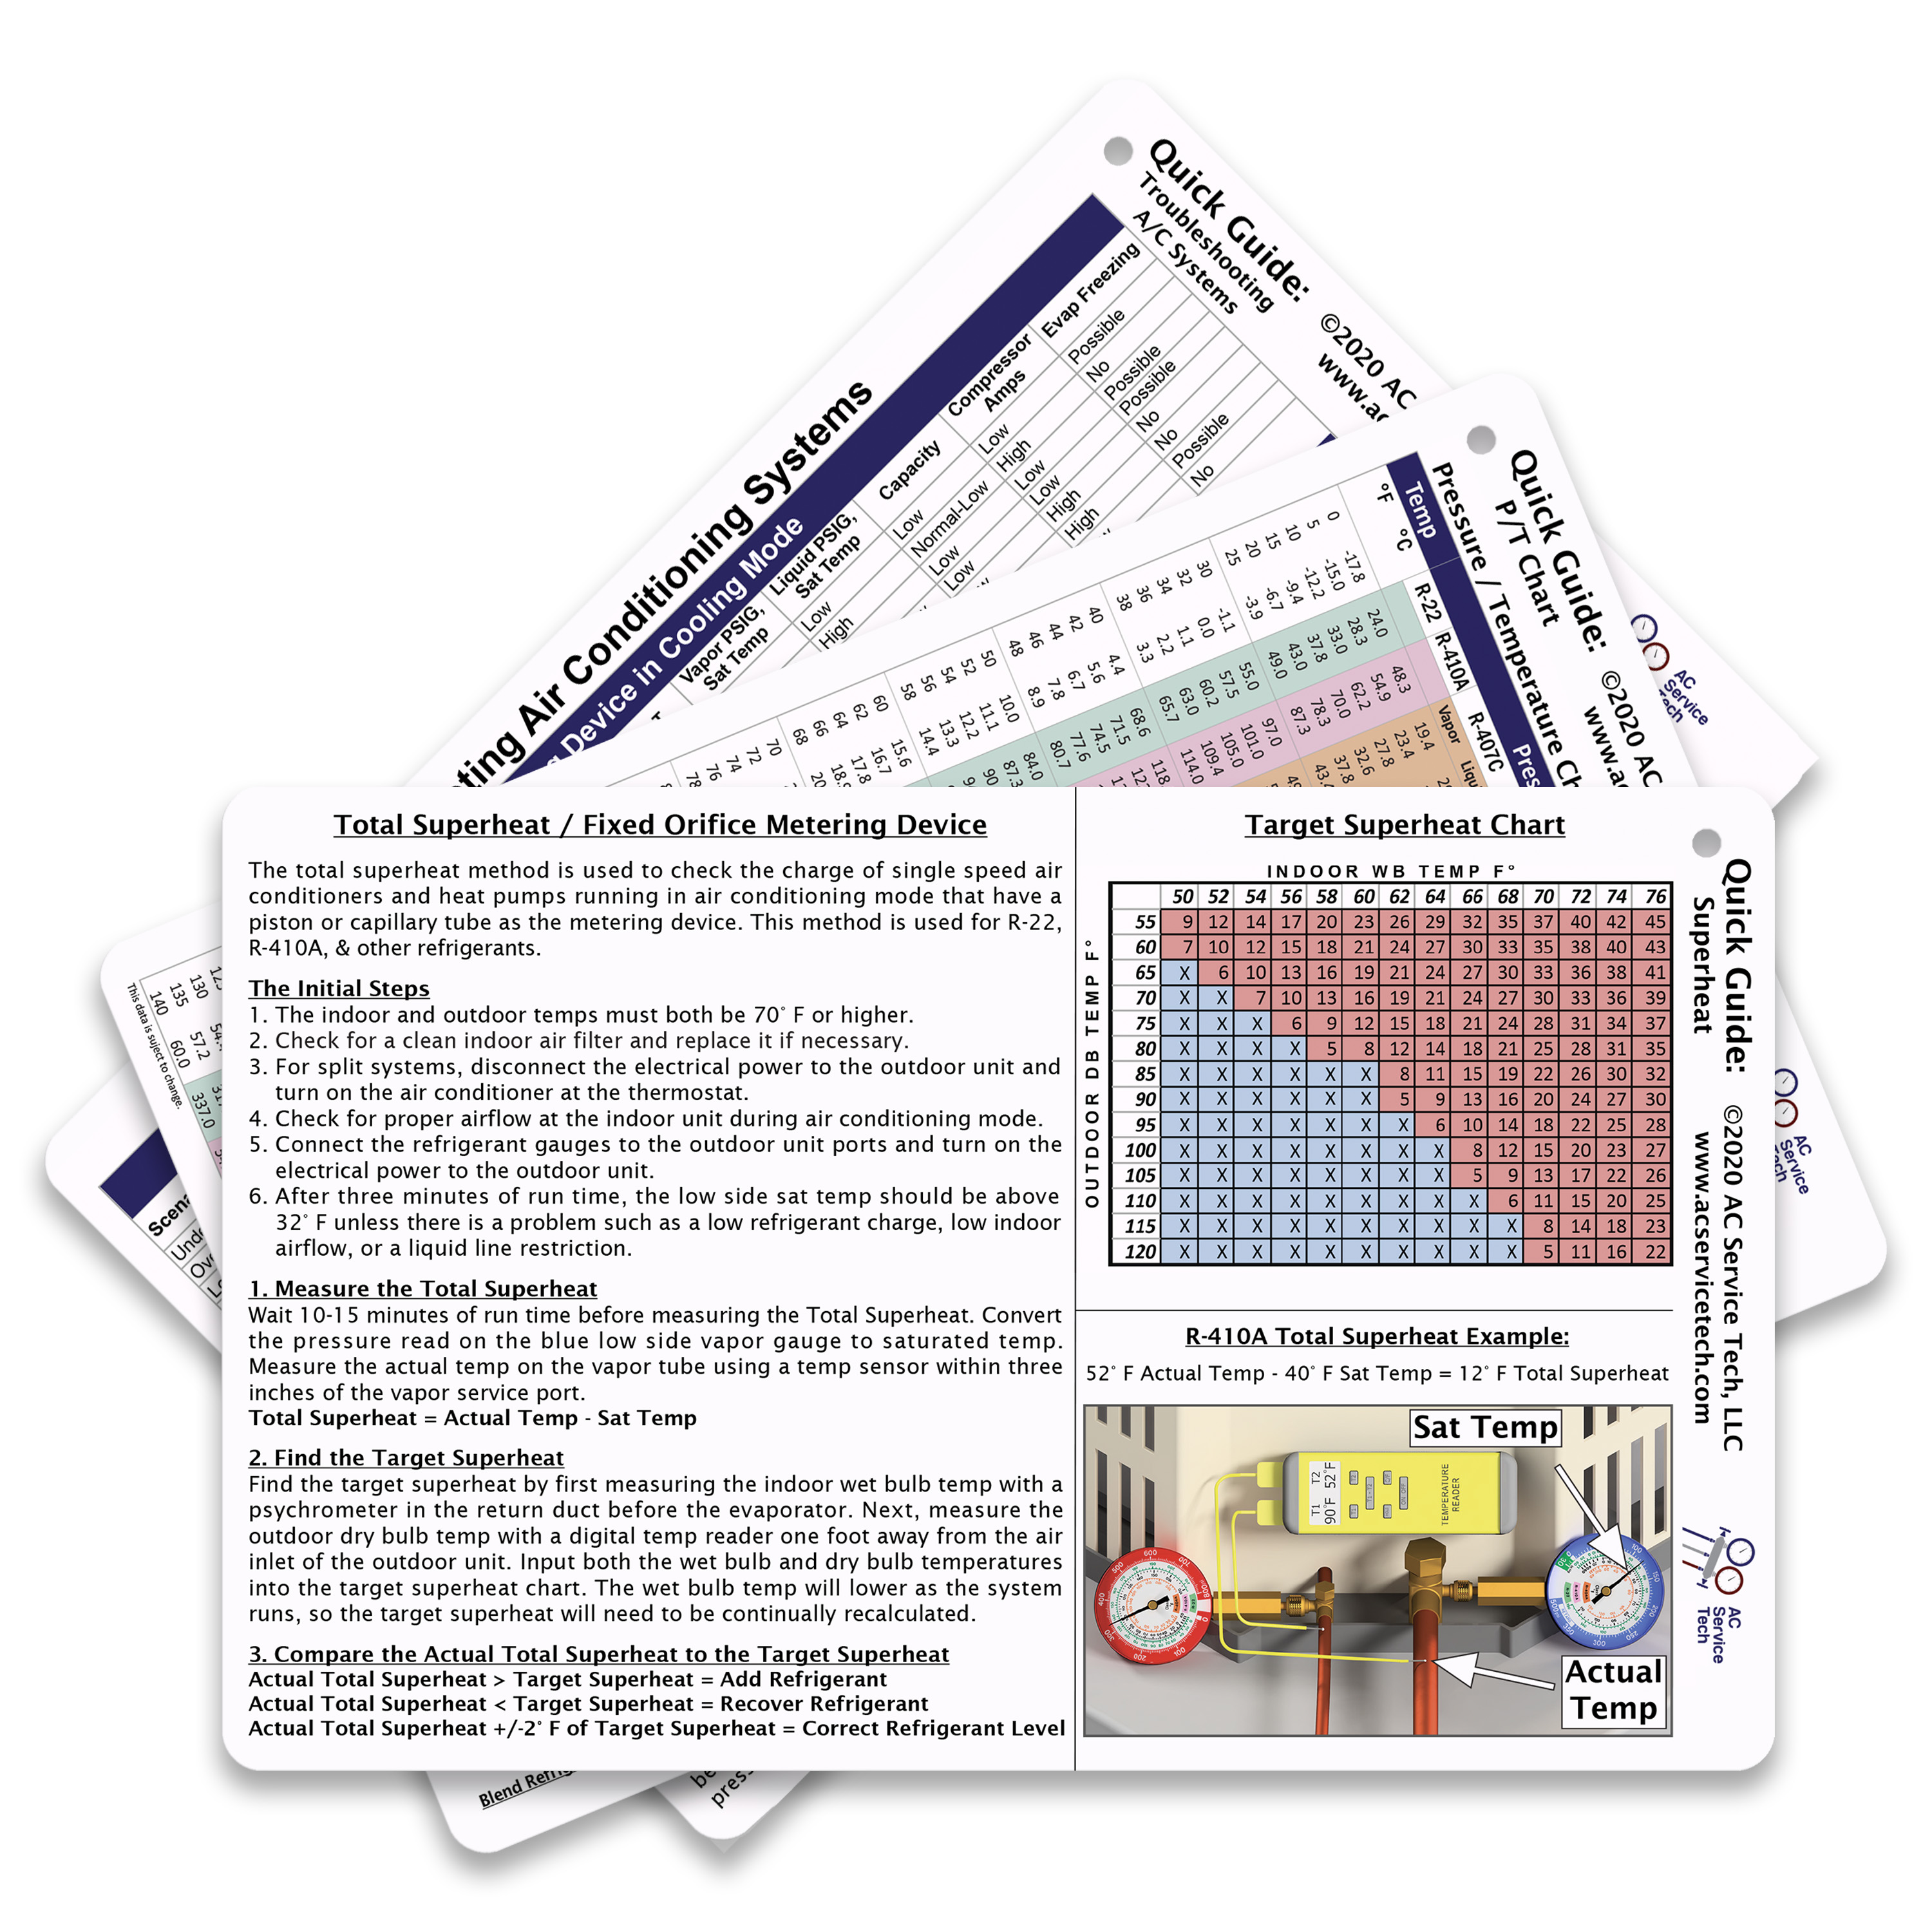 HVAC Quick Reference Cards for Refrigerant Charging and Troubleshooting